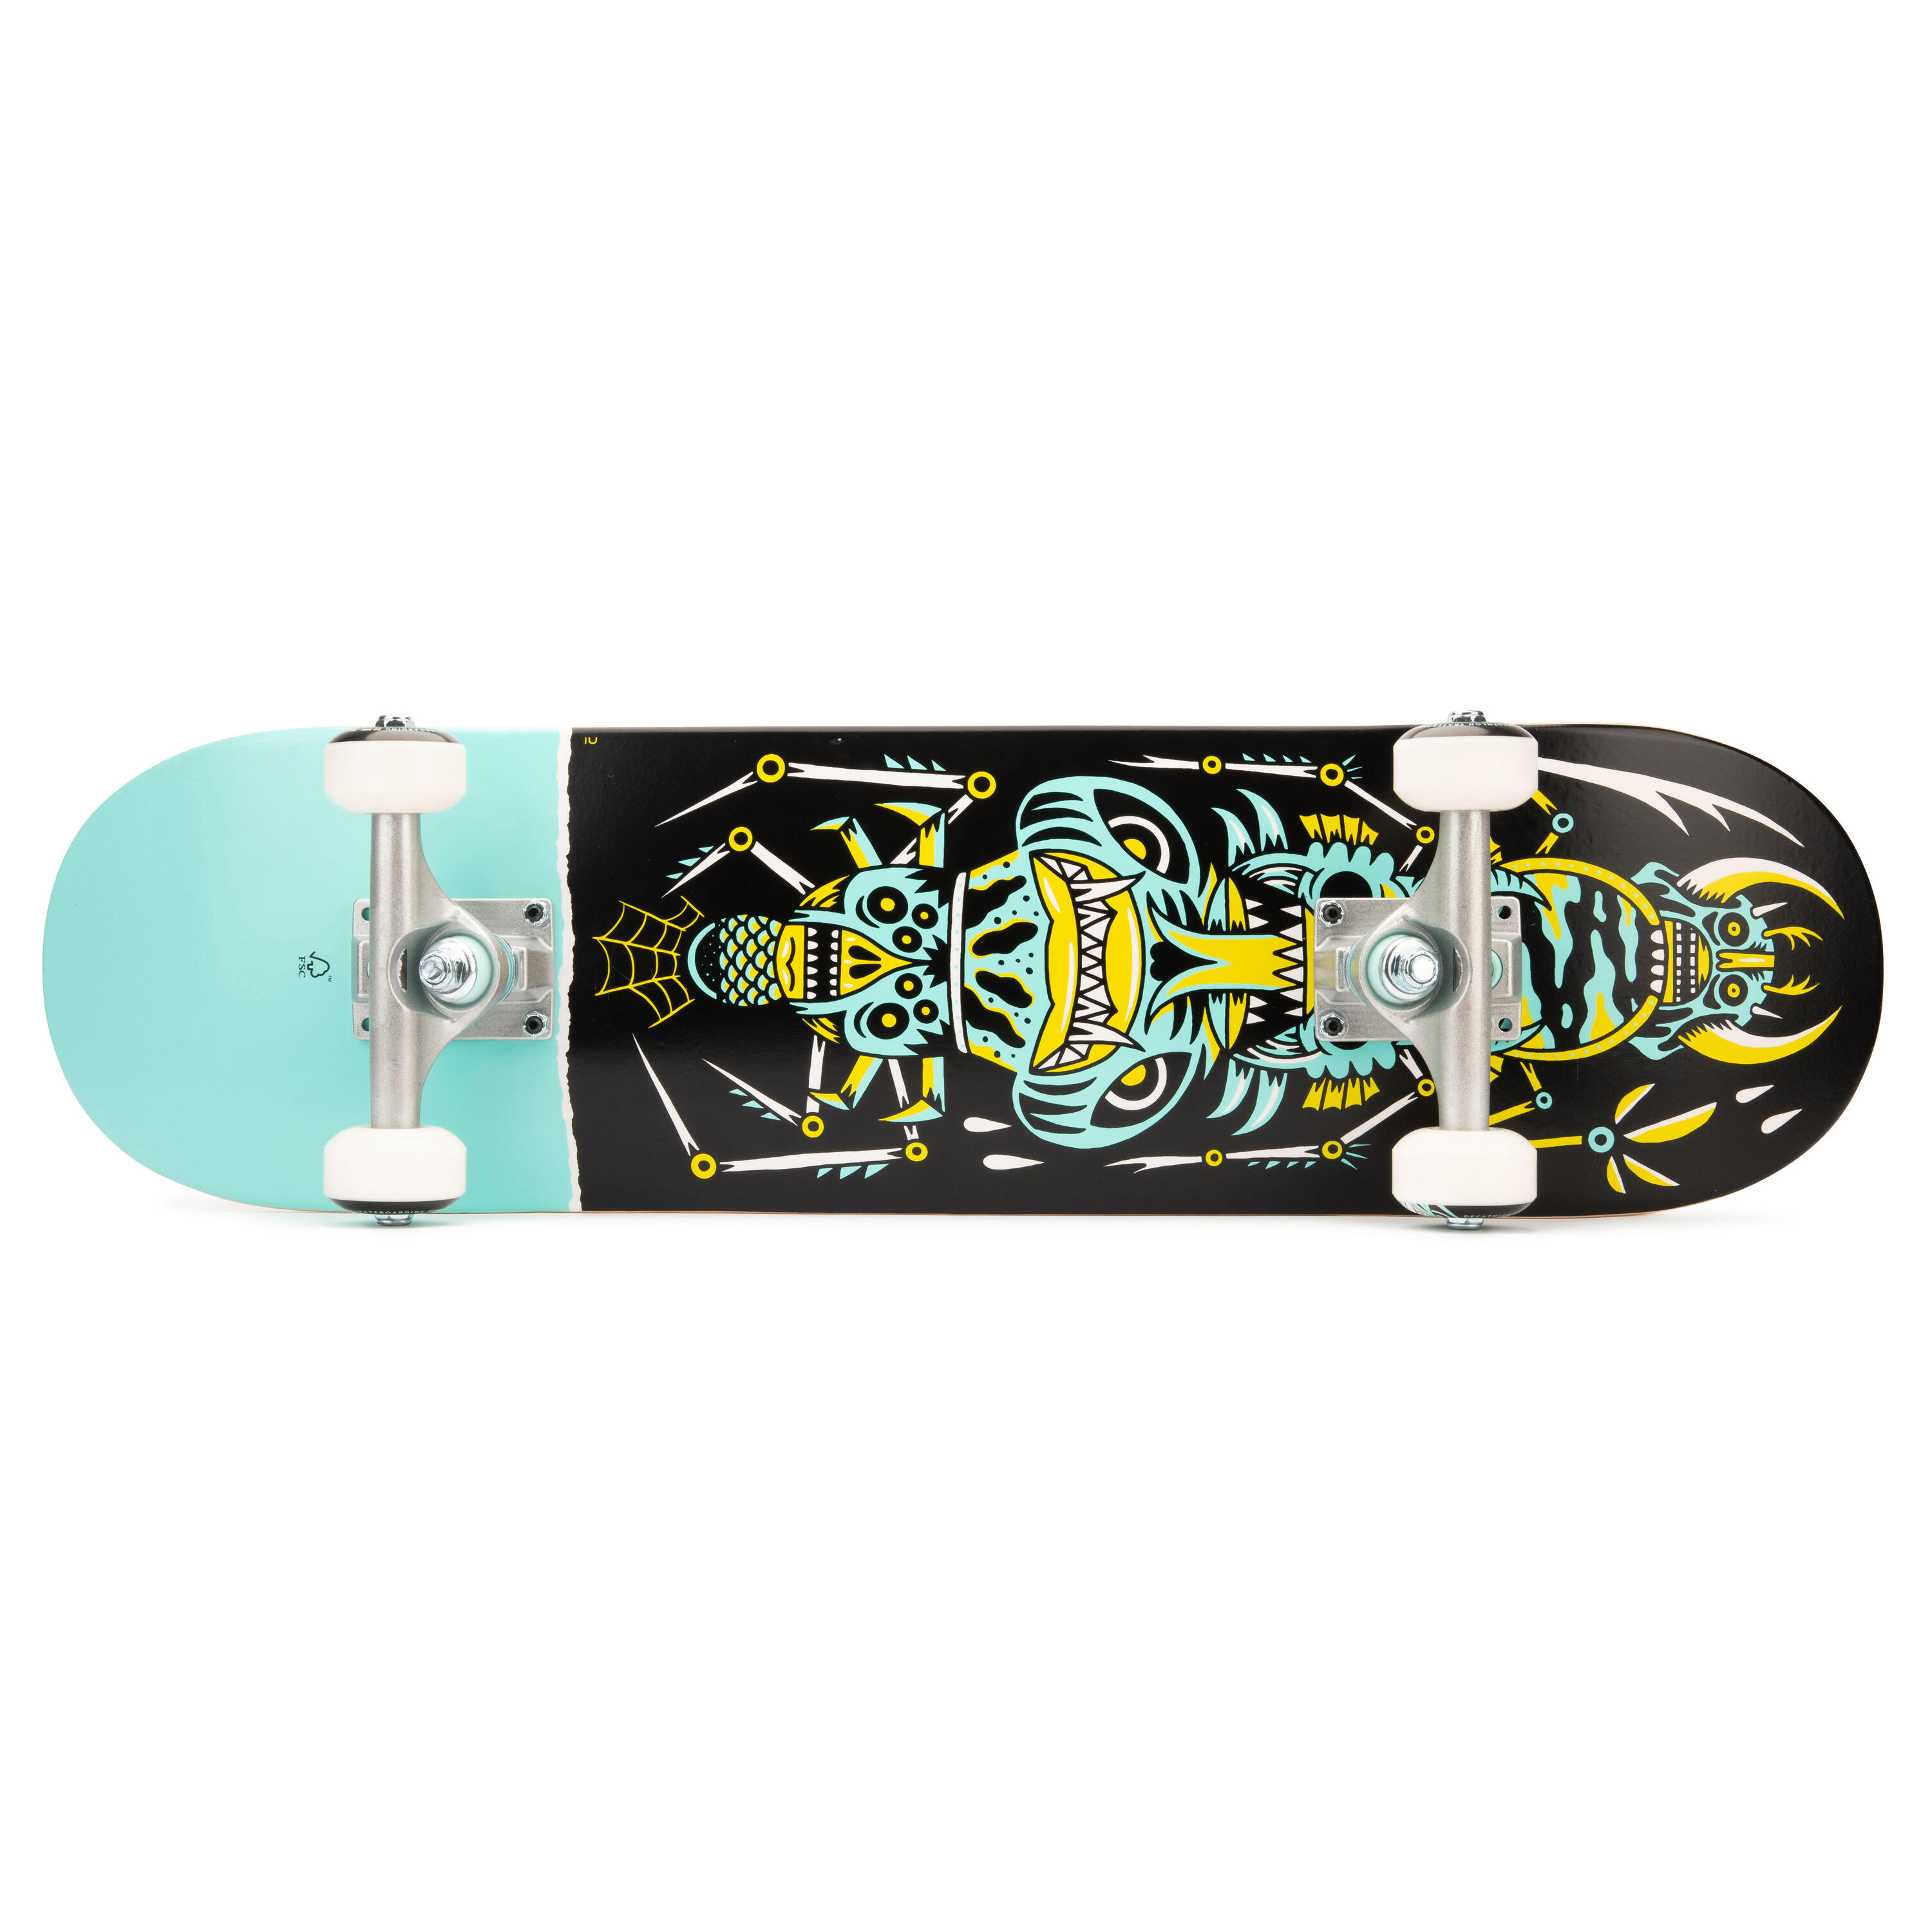 Kids' Skateboard 3-7 Years CP100 Mini Size 7.25" - Insects 4/11